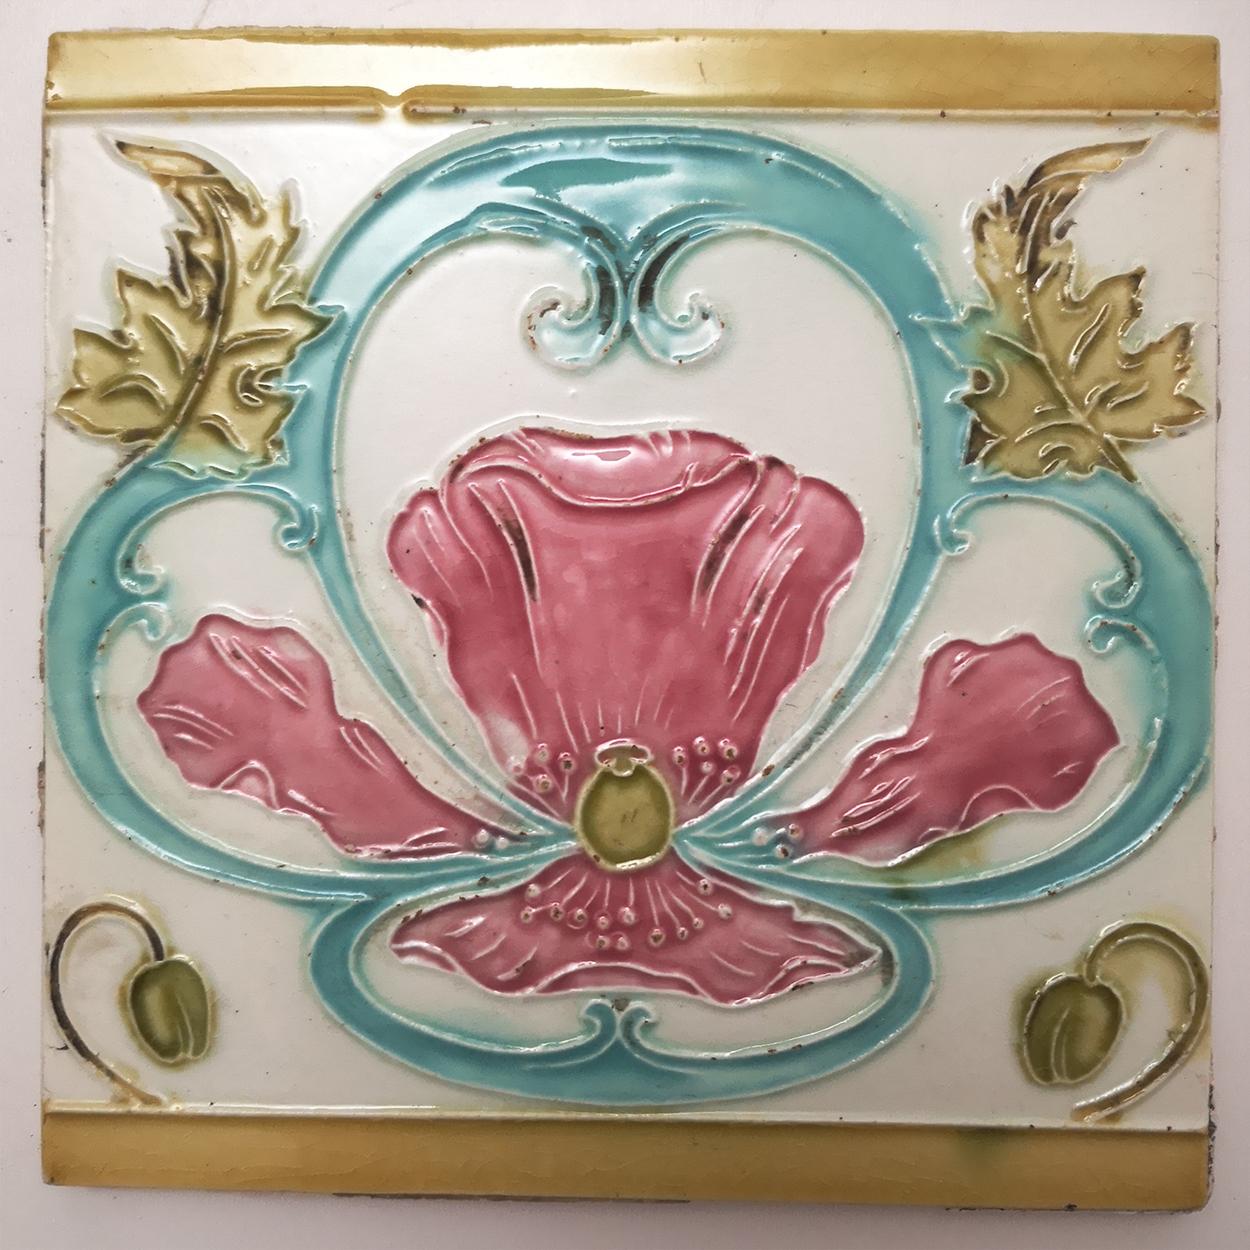 28pcs wonderful Jugendstil wall tiles with image in relief. Afmetingen 15 x 15cm, total length 4.20 linear meters. 
The dimensions per tile are 5,9inch (15 cm) × 5,9 inch (15 cm) .

Please note that the piece is for one piece. 28 pieces